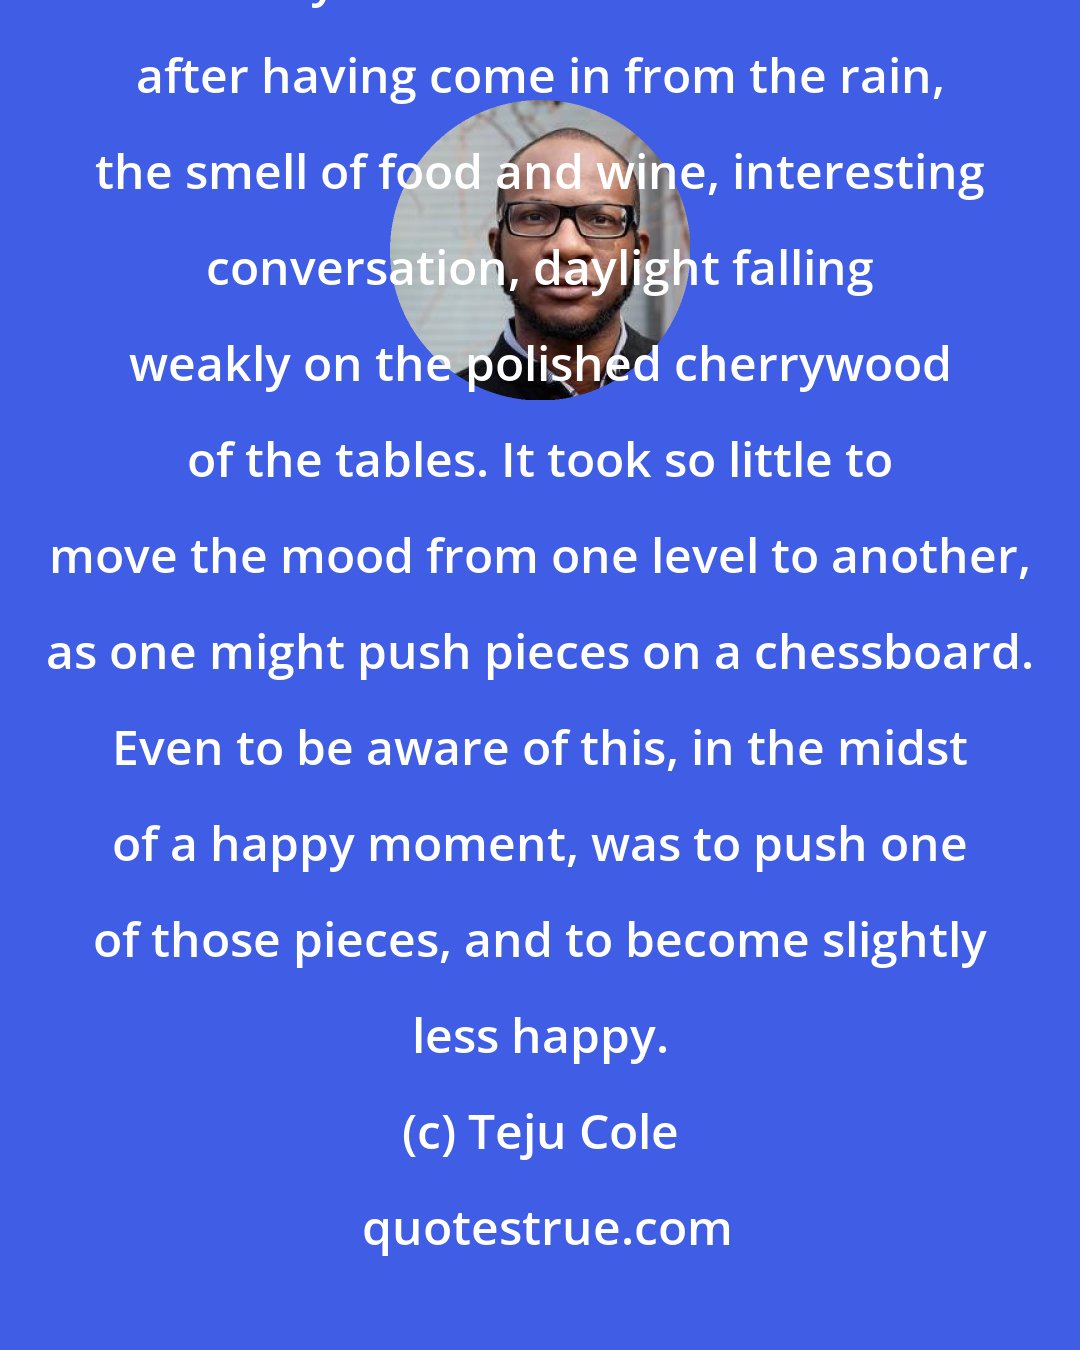 Teju Cole: I became aware of just how fleeting the sense of happiness was, and how flimsy its basis: a warm restaurant after having come in from the rain, the smell of food and wine, interesting conversation, daylight falling weakly on the polished cherrywood of the tables. It took so little to move the mood from one level to another, as one might push pieces on a chessboard. Even to be aware of this, in the midst of a happy moment, was to push one of those pieces, and to become slightly less happy.